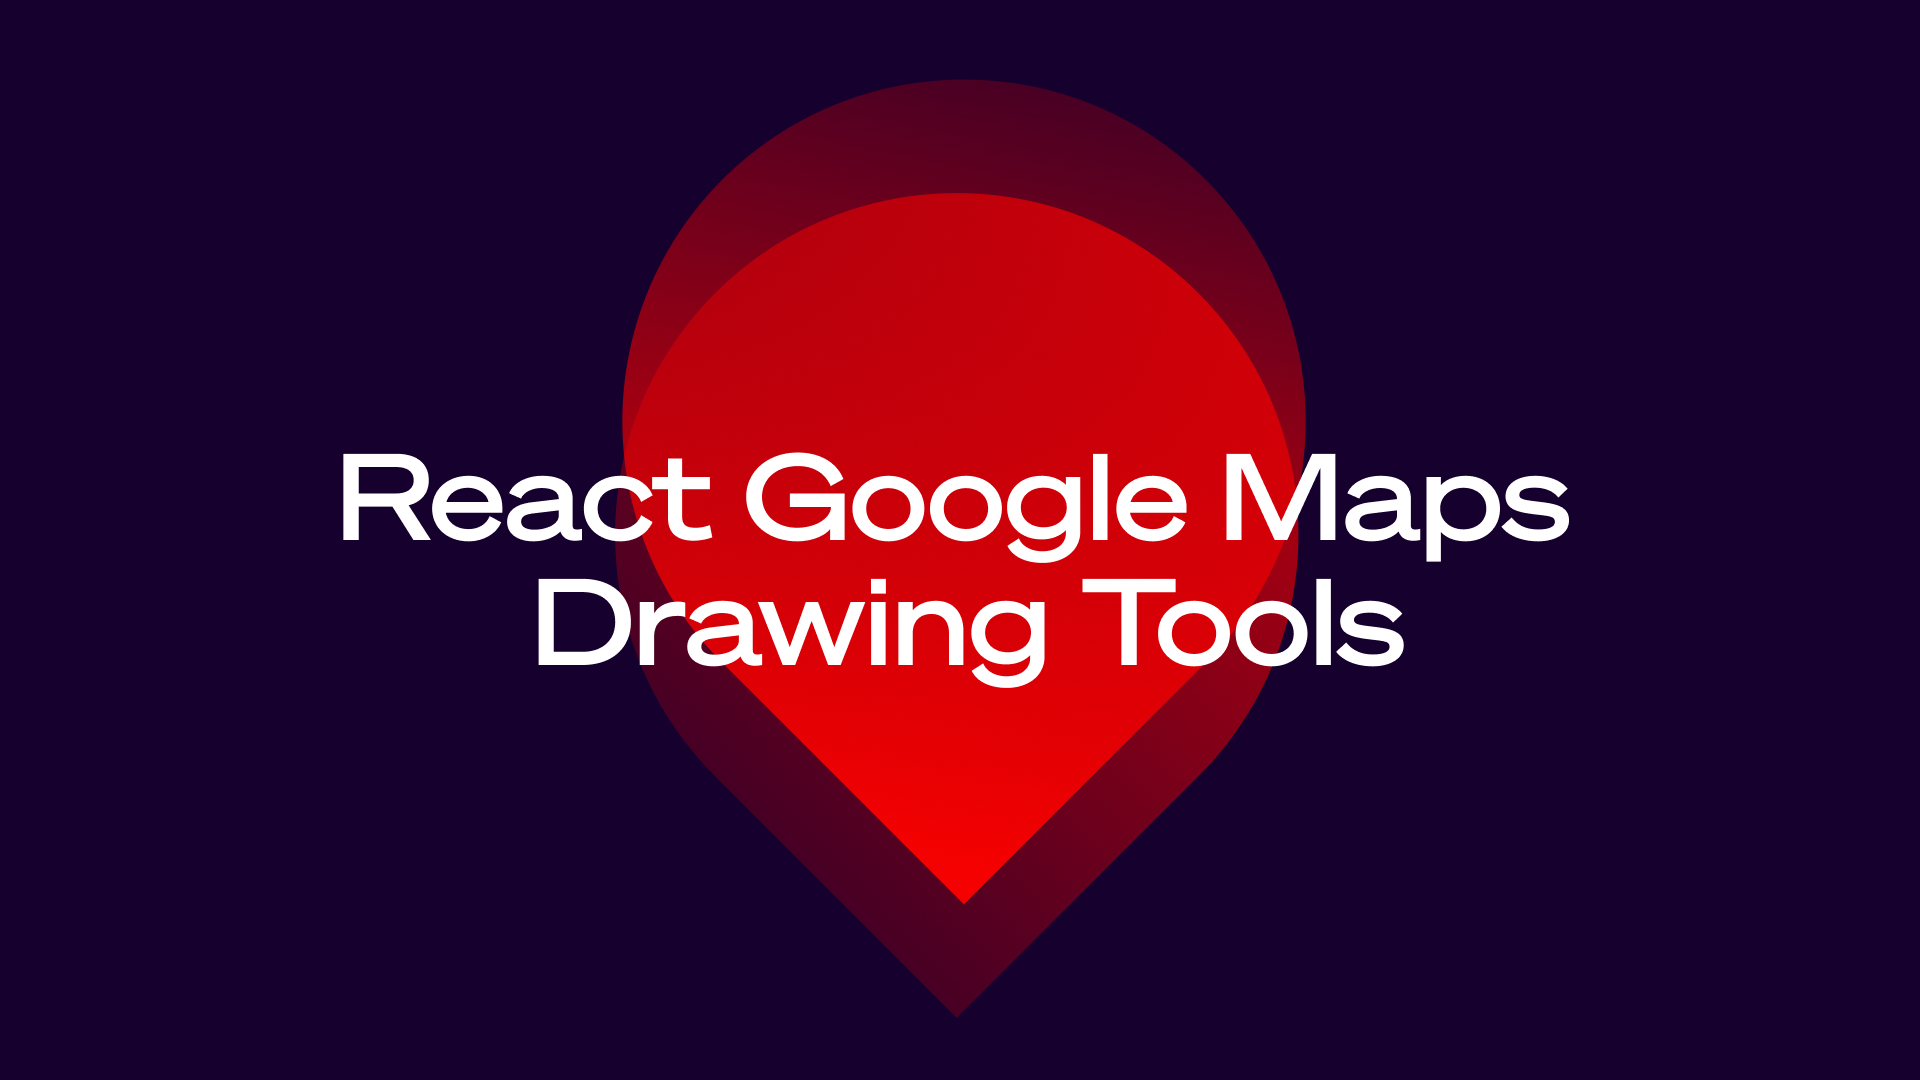 Abstract illustration representing the functionality and usage of Google Maps drawing tools as described in the article. Colorful and dynamic lines and shapes symbolize map customization and interaction.